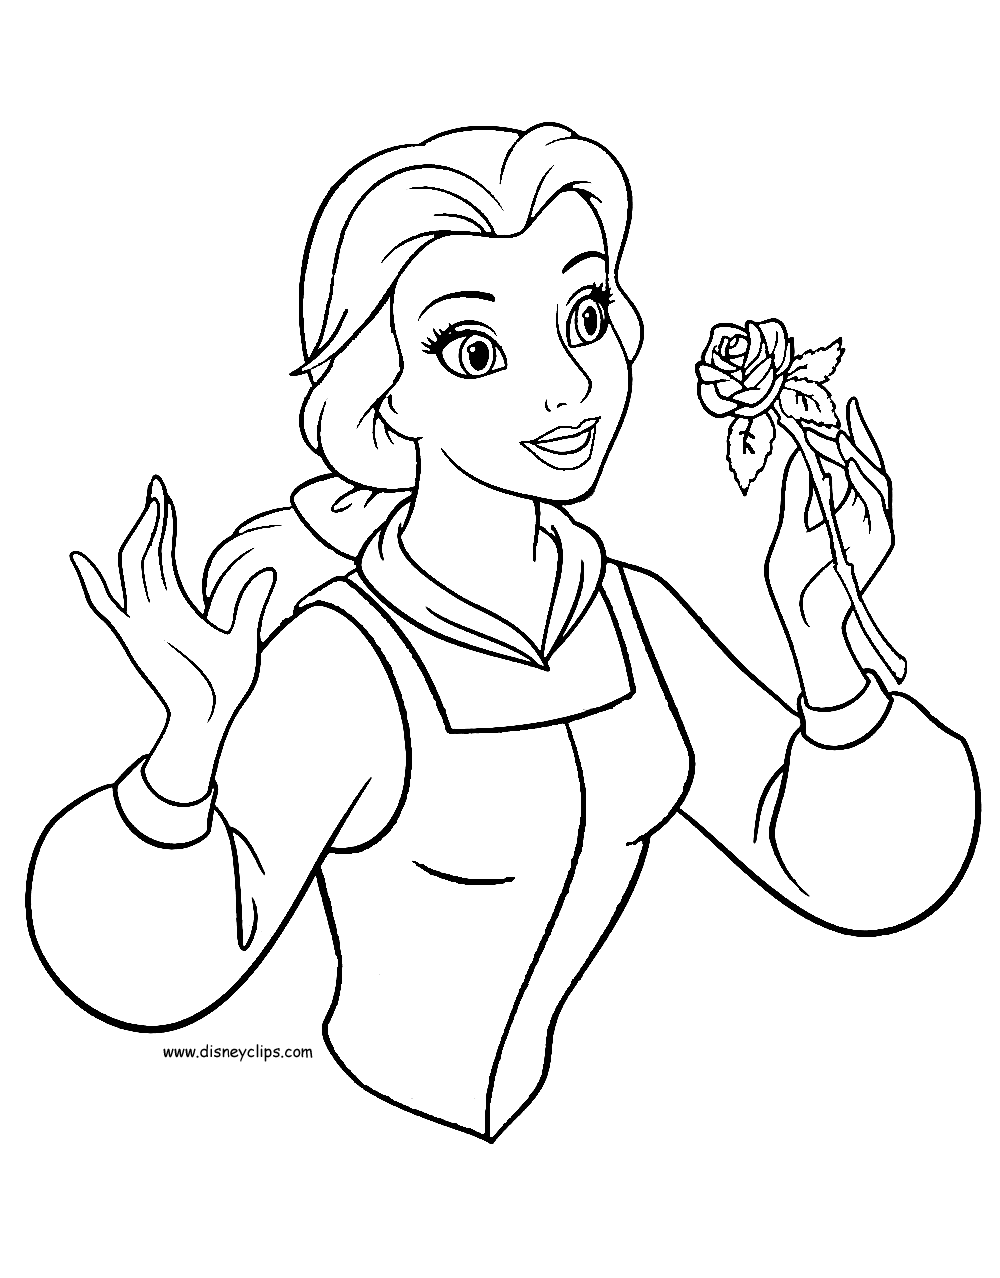 Beauty and the Beast Coloring Pages 21   Disneyclips.com